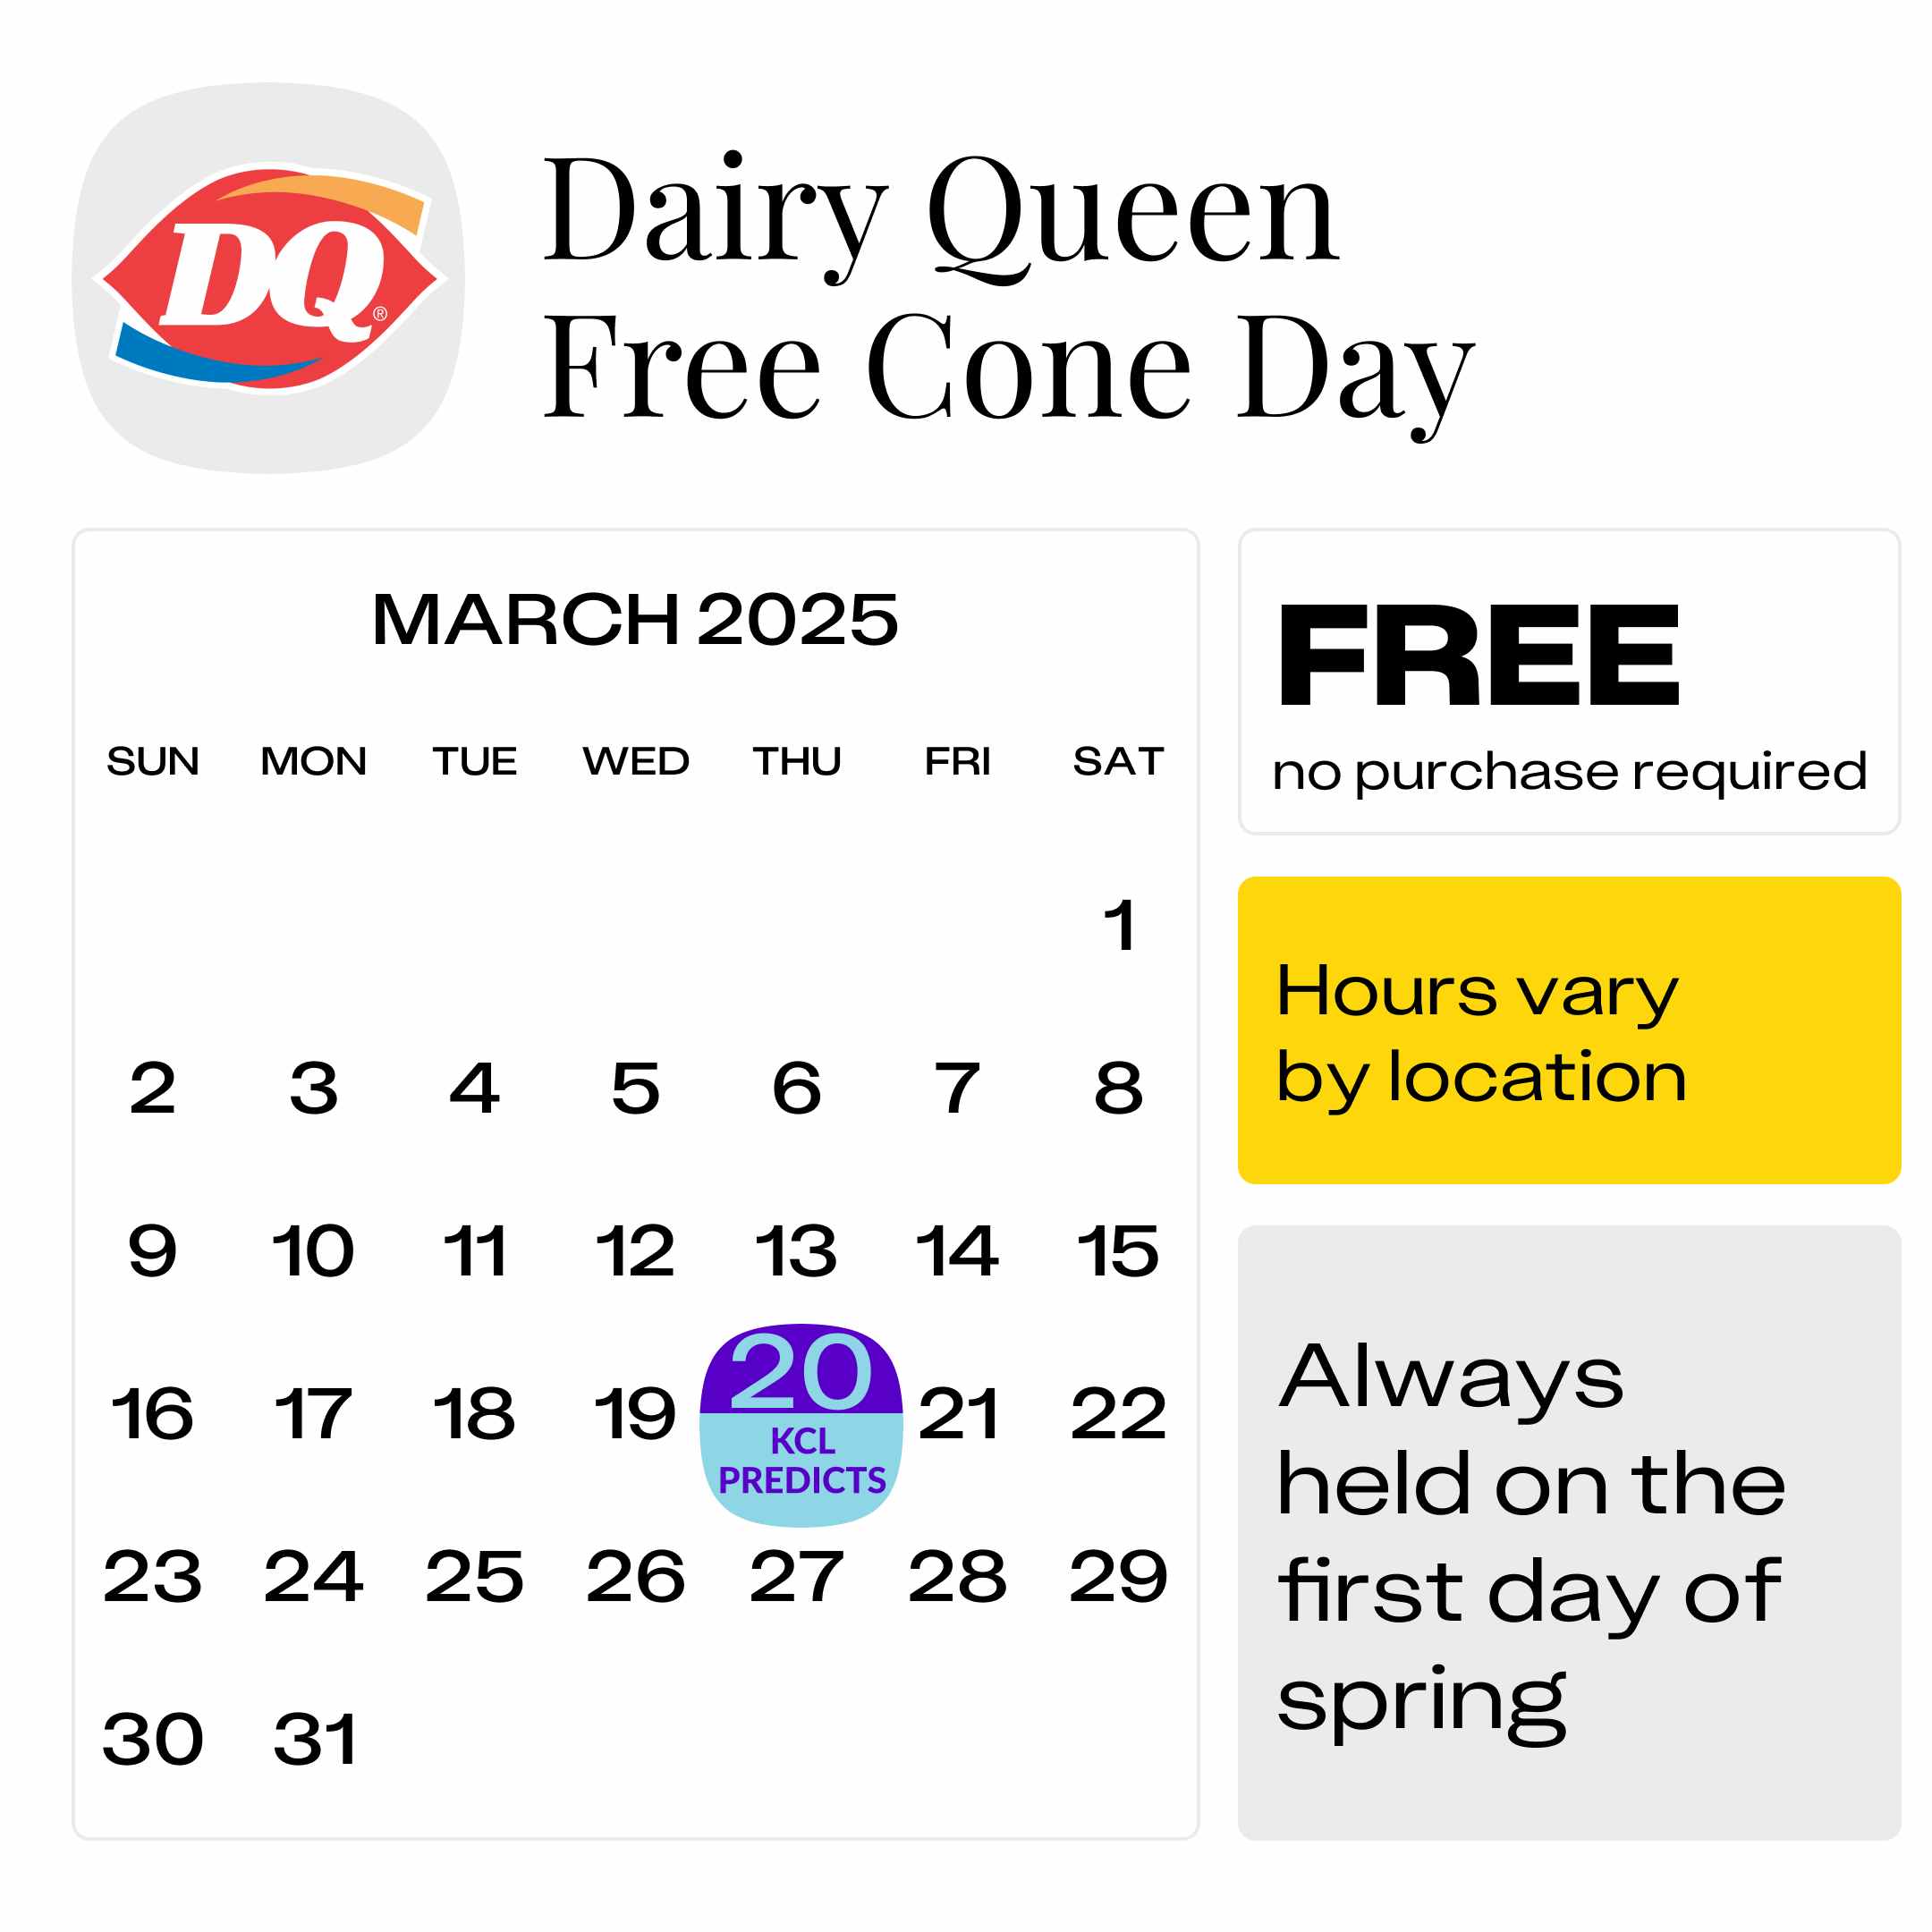 DQ-free-cone-day-march-2025